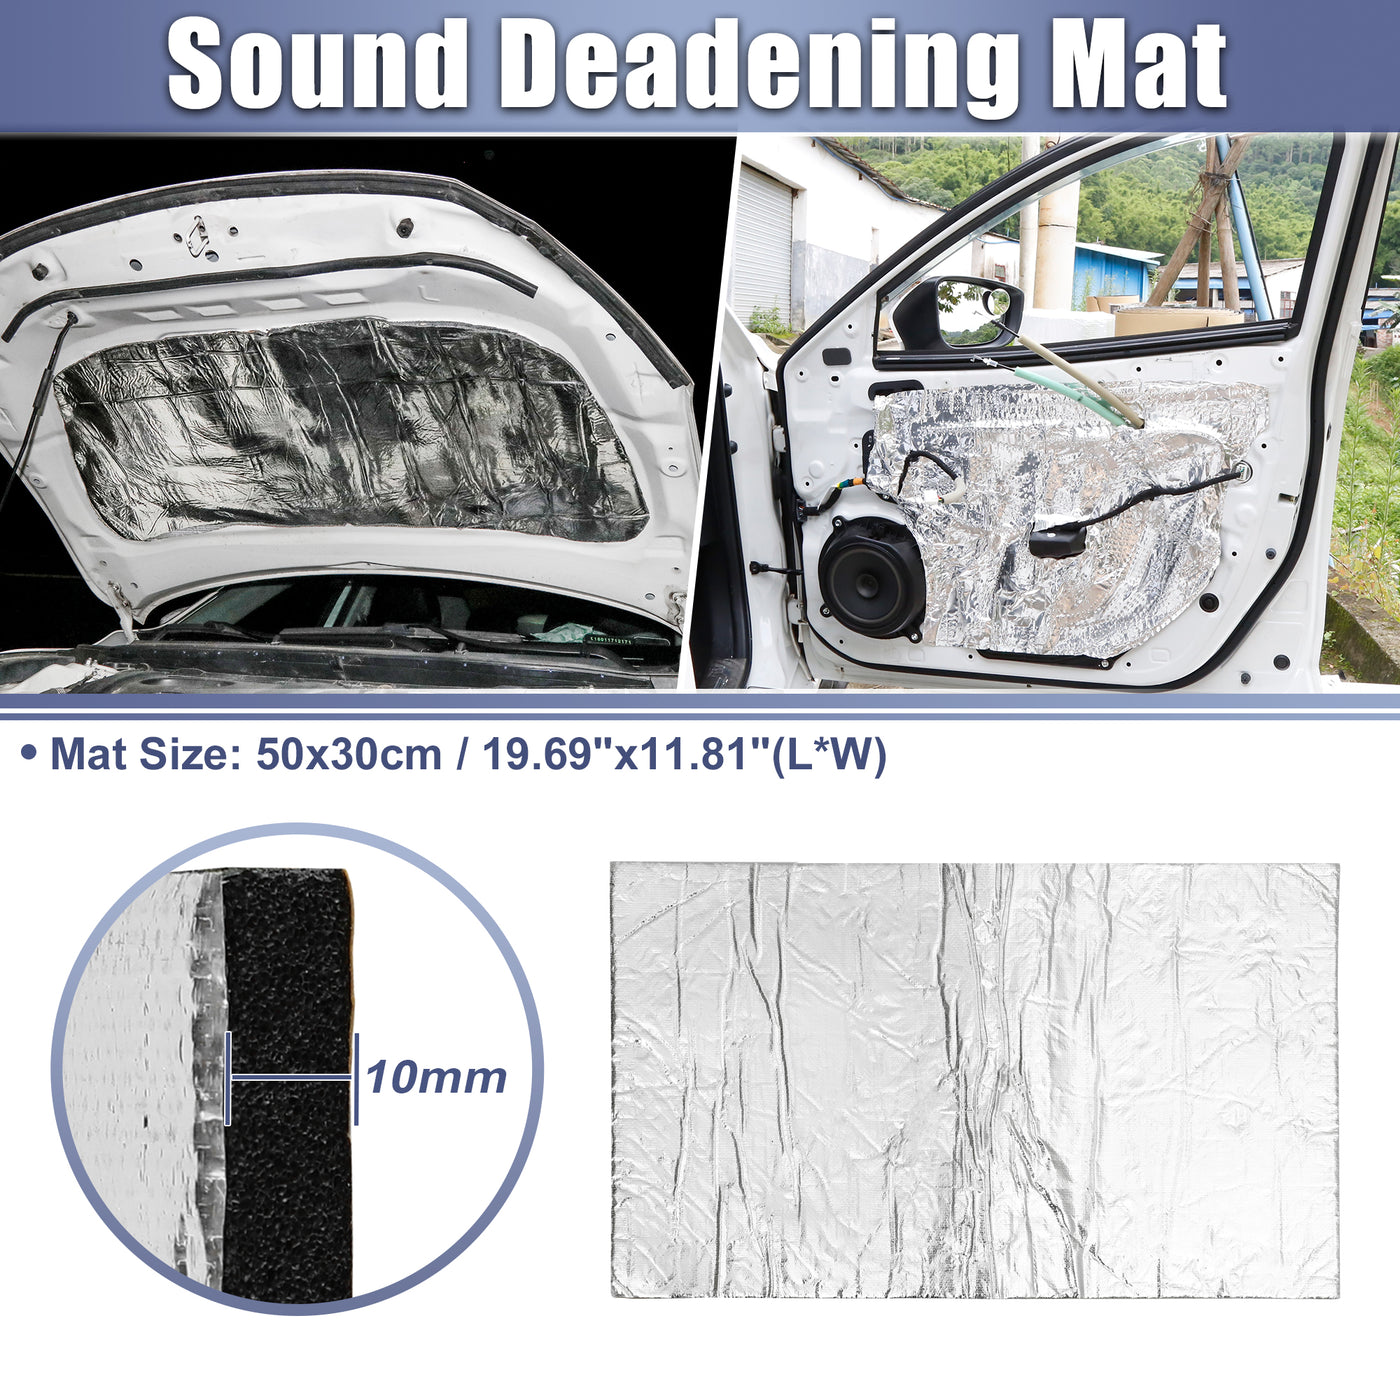 X AUTOHAUX 394mil 10mm 1.61sqft Car Sound Deadening Mat Glassfiber Closed Cell Foam Heat Shield Material Damping Self Adhesive Universal for Hood Fender and Boat Engine Cover 19.69"x11.81"